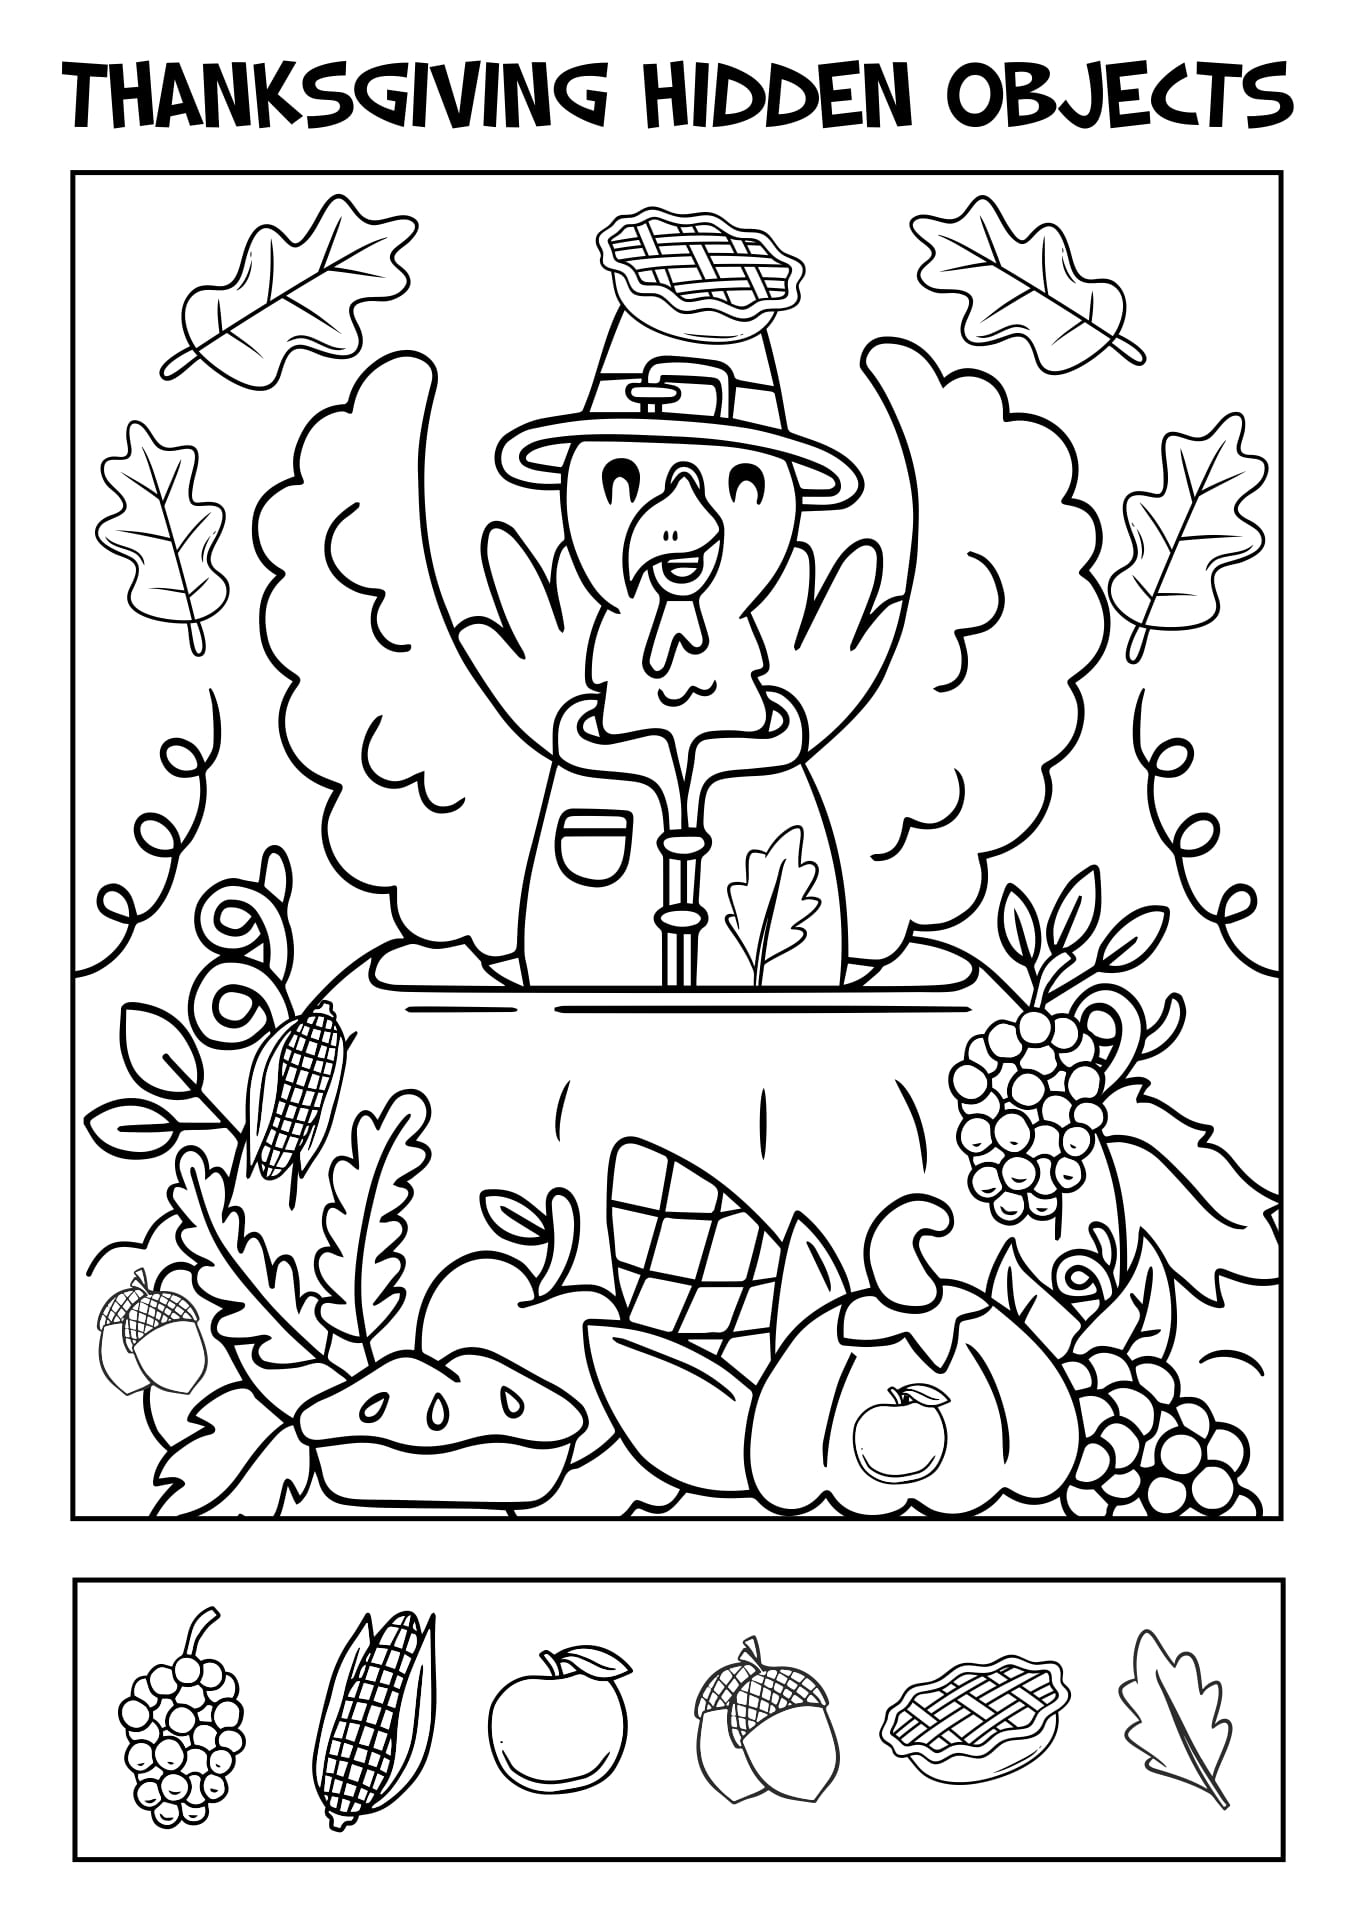 Printable Thanksgiving Hidden Picture Games_52991